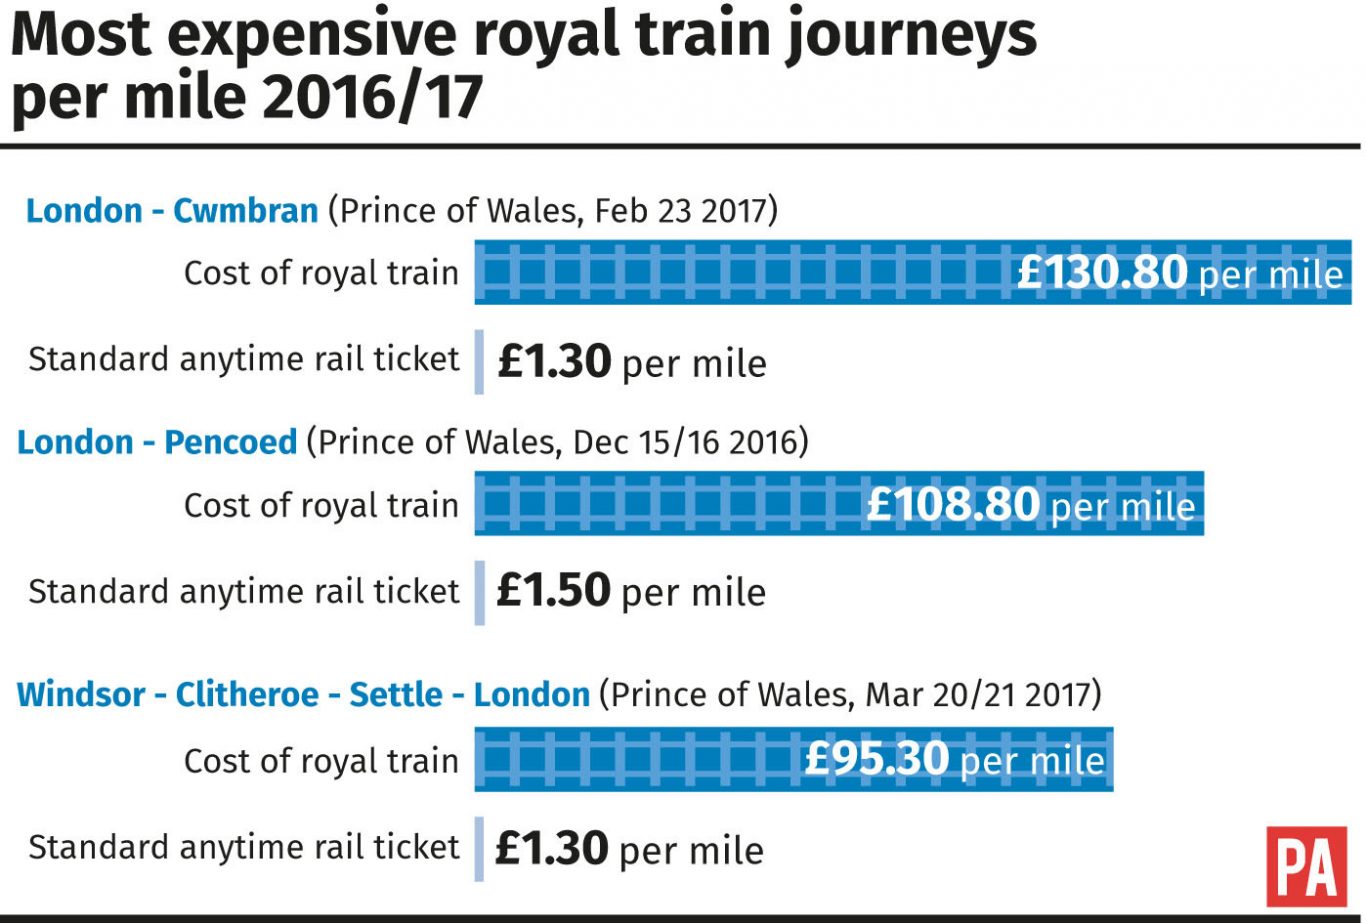 Most expensive royal train journeys per mile 2016/17 graphic